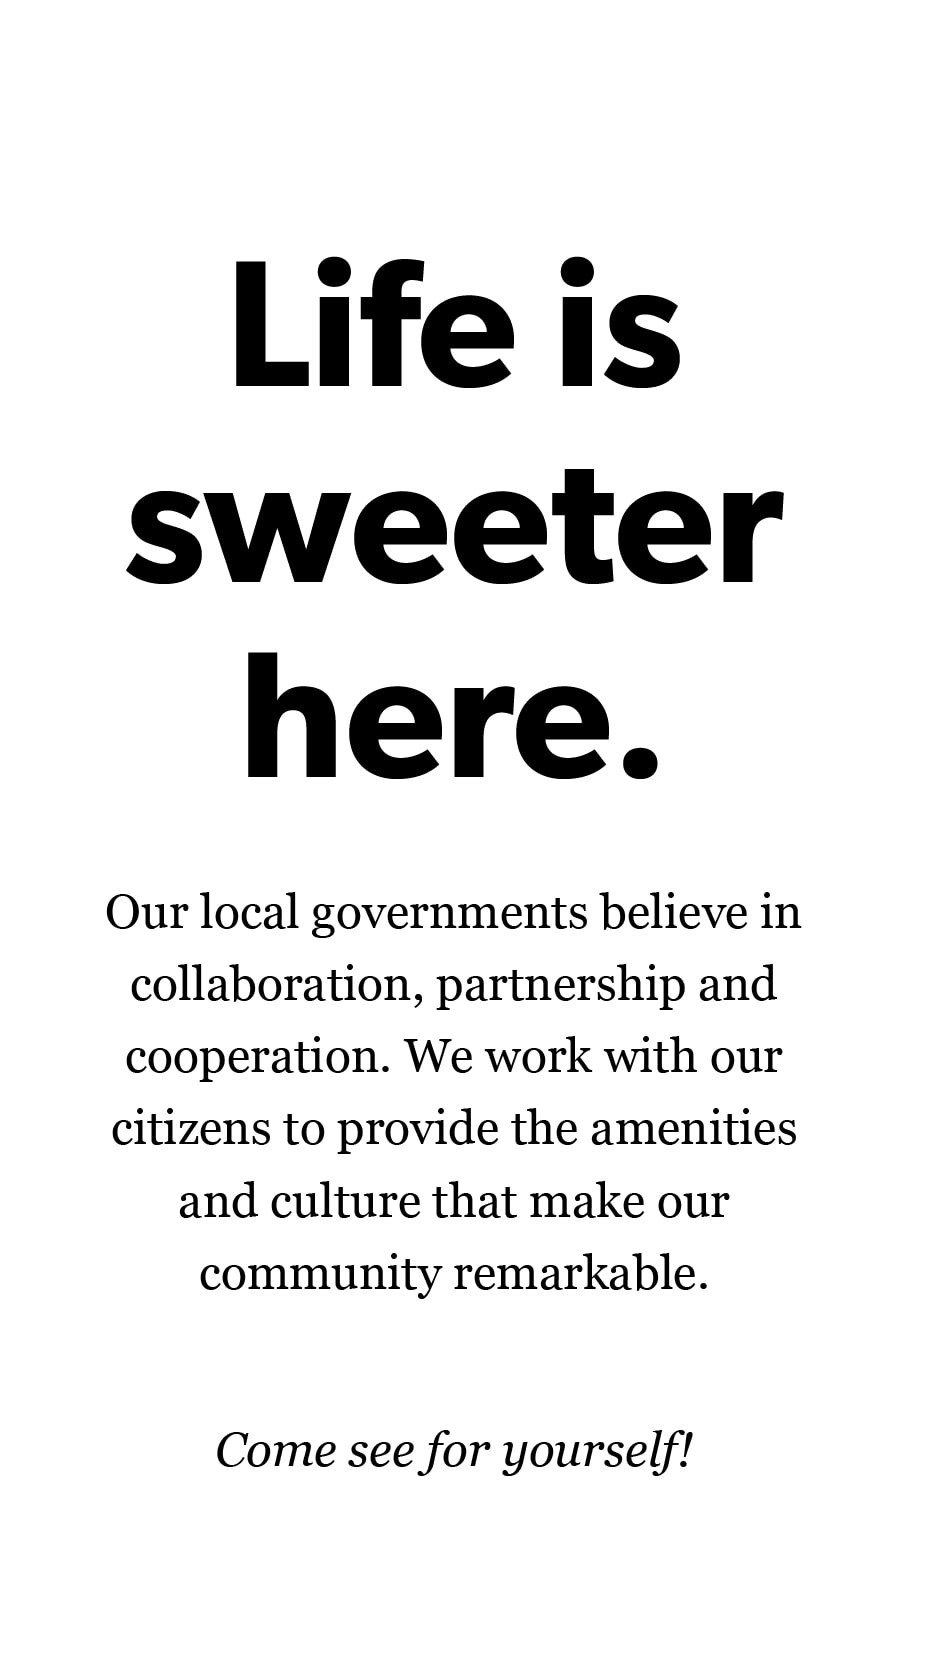 Life is sweeter here. Our local governments believe in collaboration, partnership and cooperation. We work with our citizens to provide the amenities and culture that make our community remarkable. Come see for yourself!